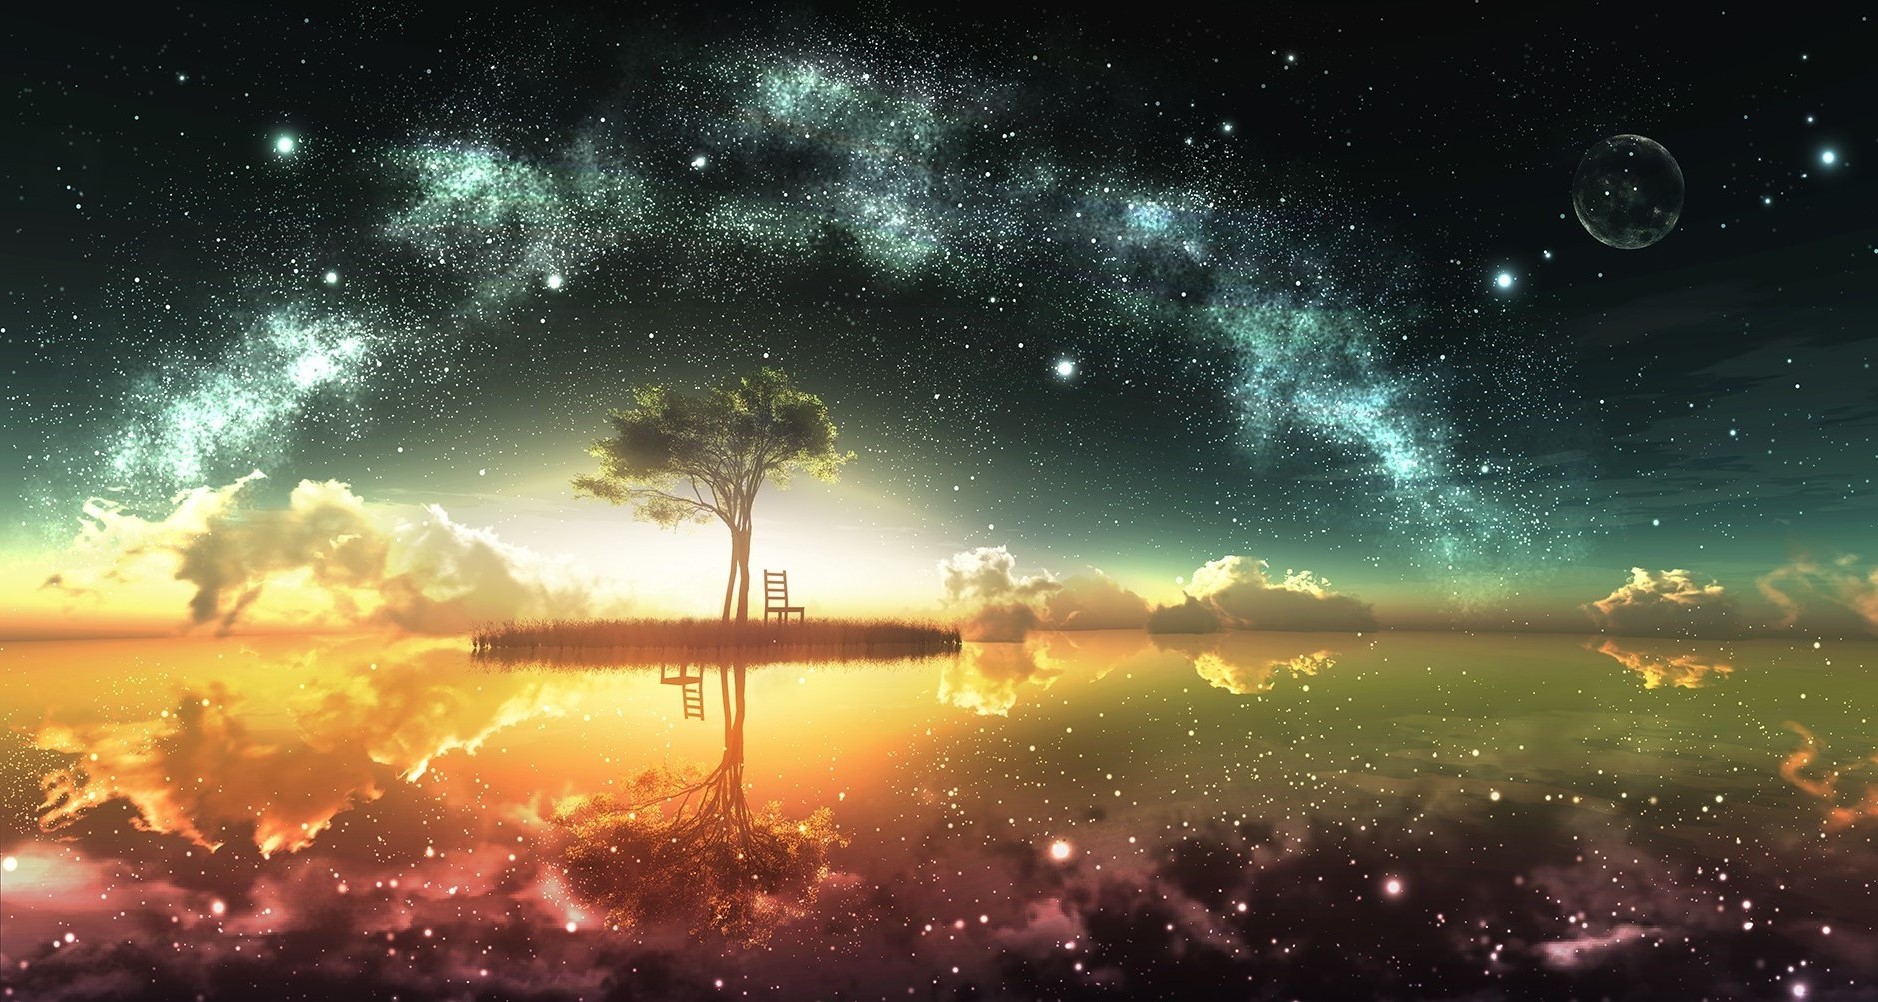 Wallpaper, water, trees, sky, sea, lake, space, galaxy, Milky Way, chair, colorful, reflection, clouds, stars, sunlight, sunrise, evening 1878x1002